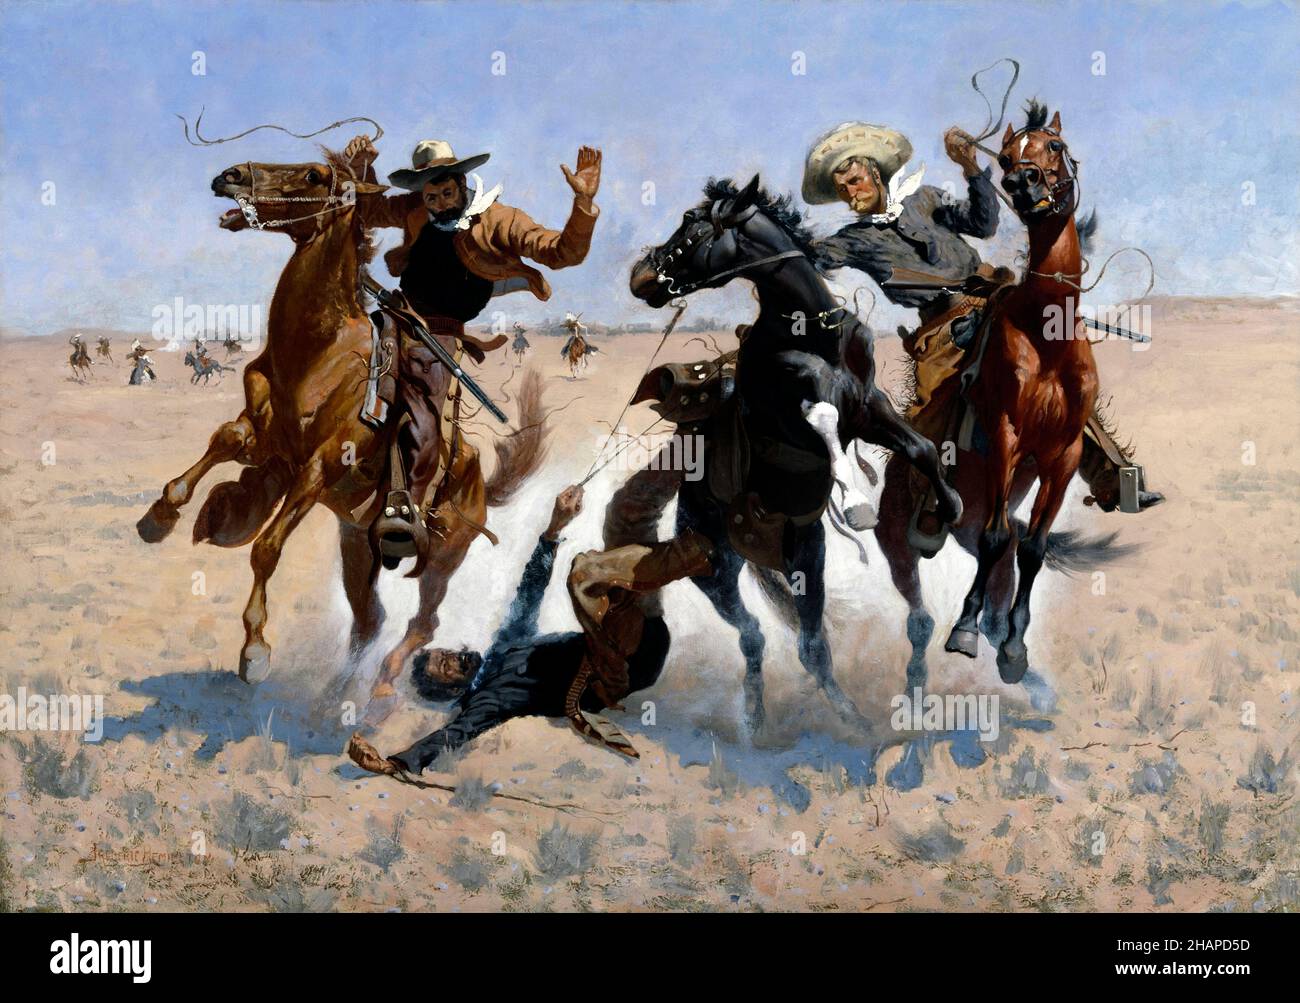 Aiding a Comrade by the American artist, Frederic Remington (1861-1909), oil on canvas, 1889/90 Stock Photo